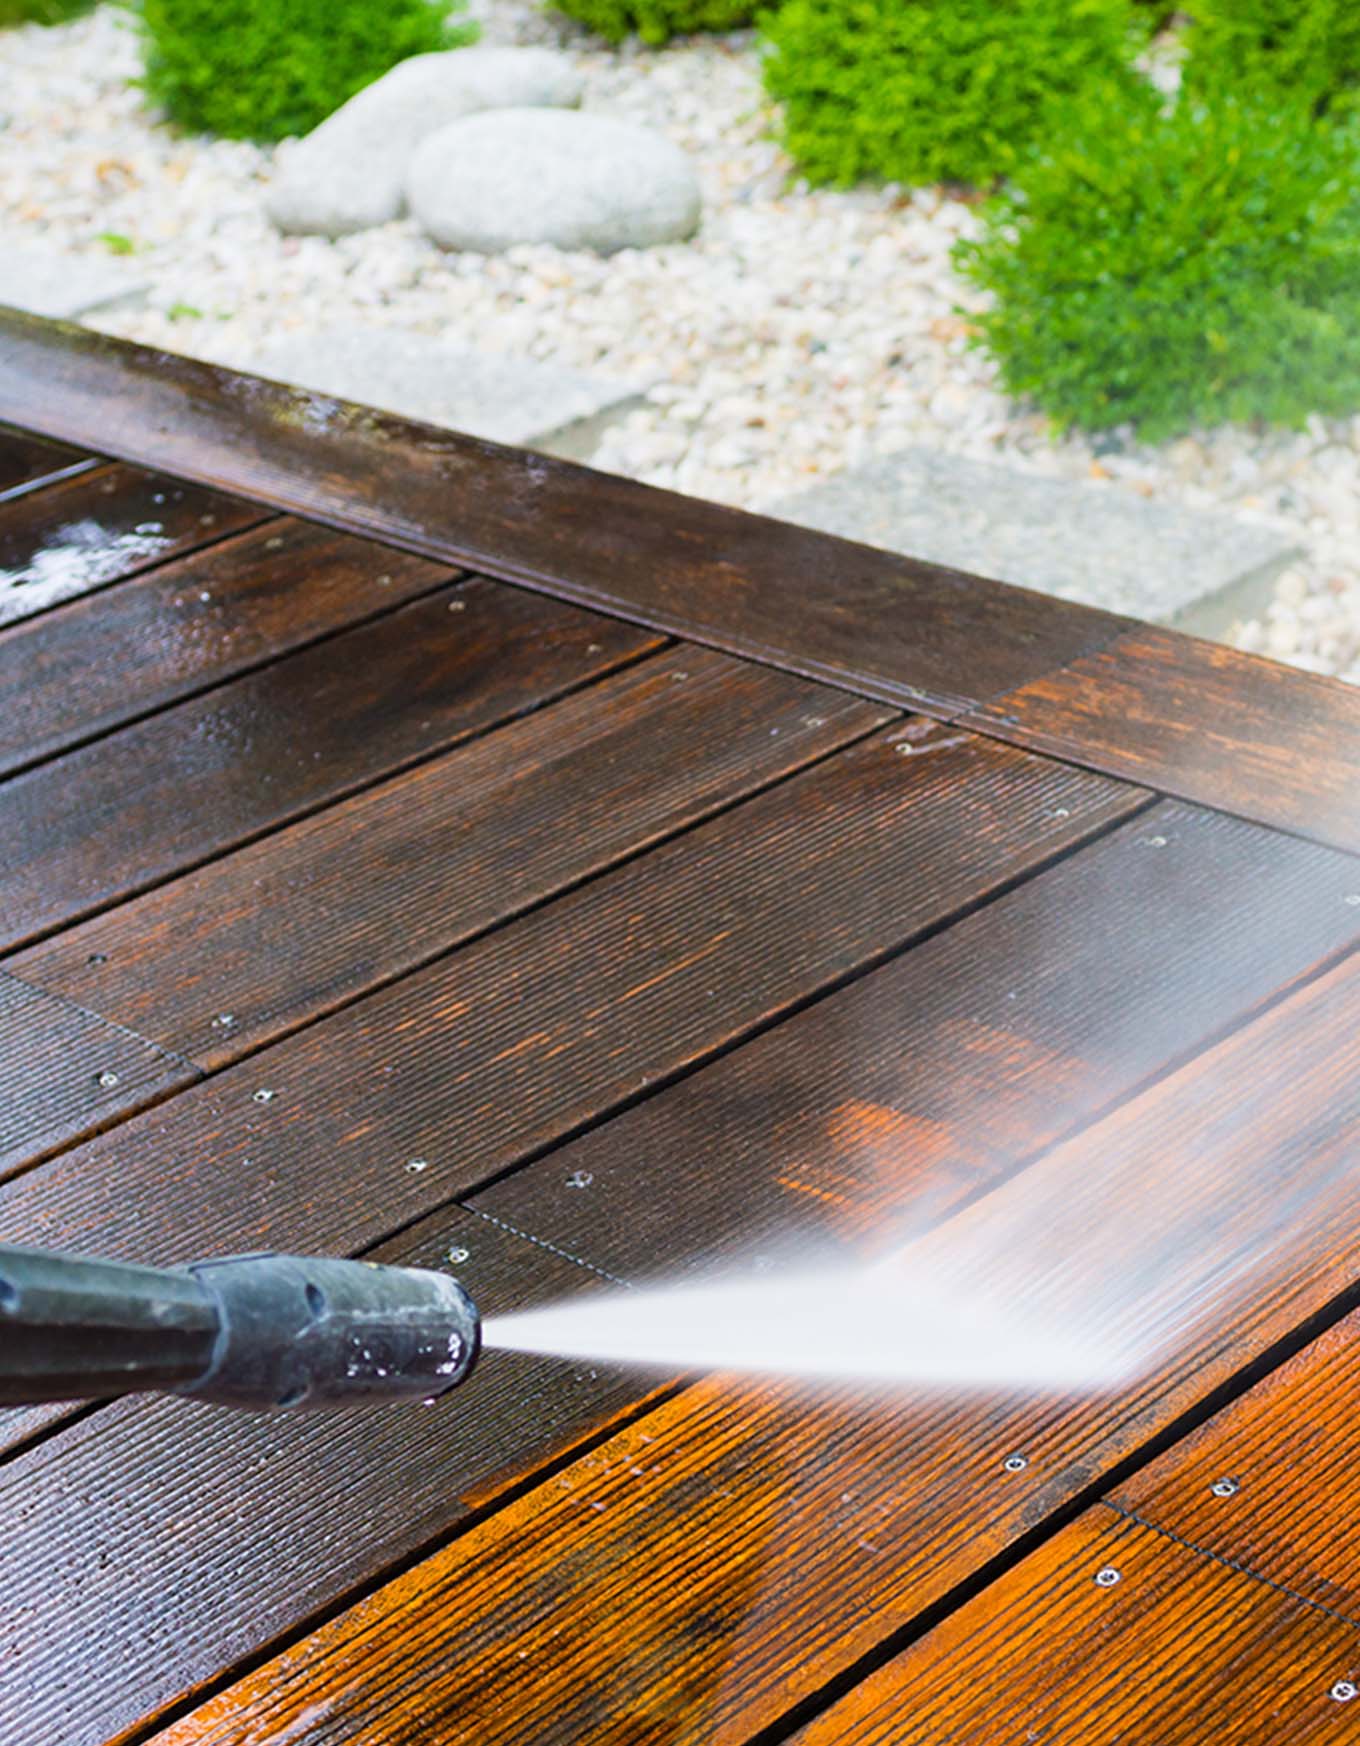 One of the Willow team jet-cleaning some decking